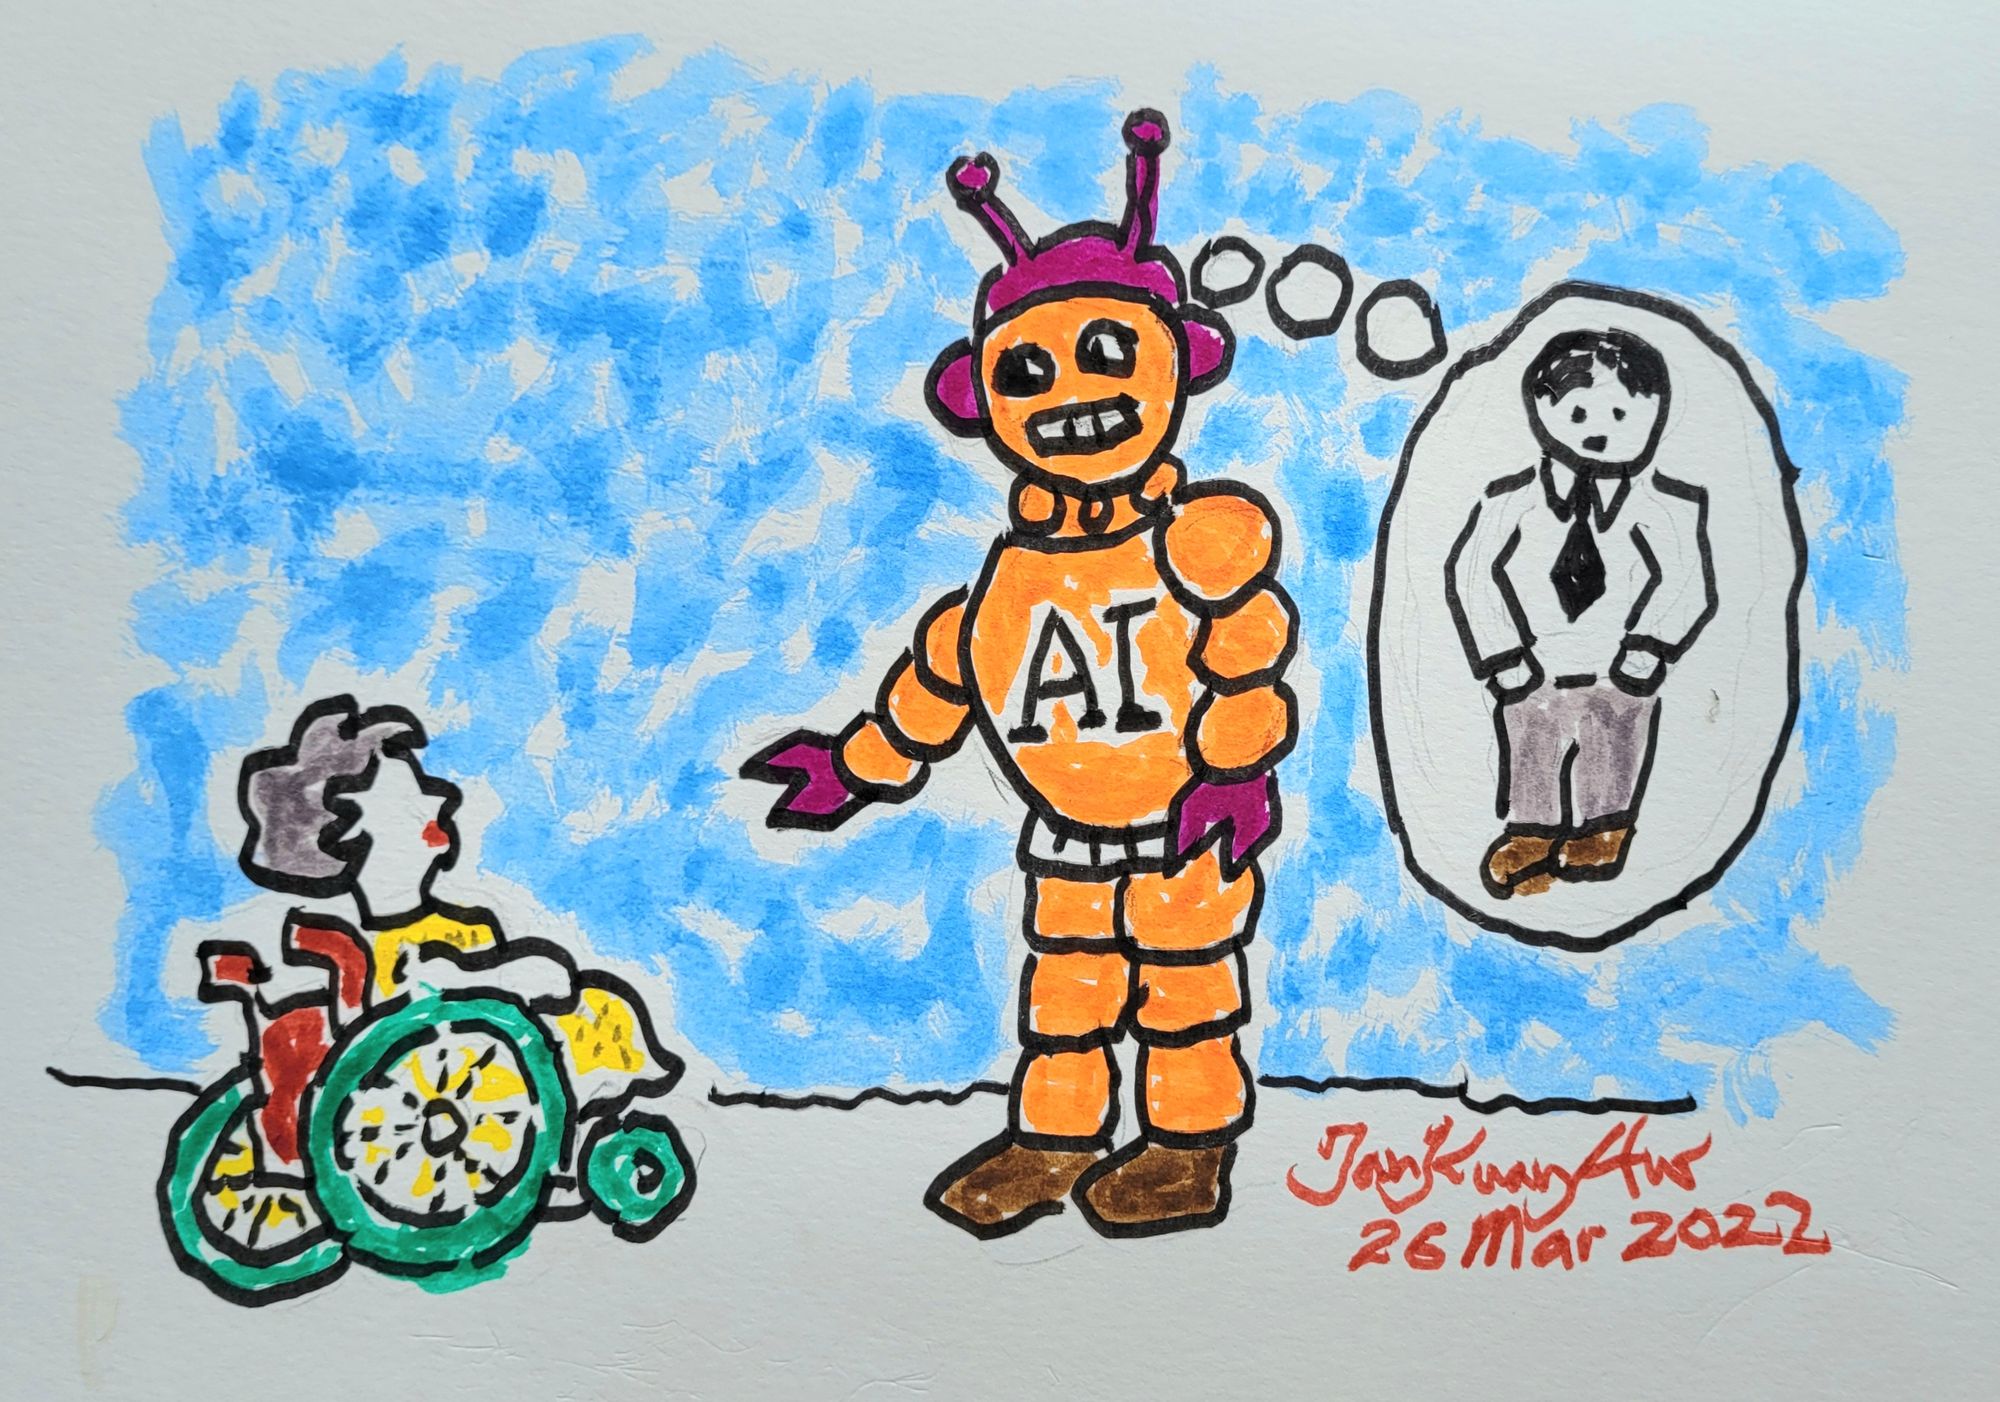 An artistic representation, in watercolour, of a robot gesturing negatively towards a woman in disability. The robot has a thought bubble of an expressionless and black-and-white man with a tie and trousers. The robot, in orange, has AI on its chest, is made of segmented pieces and has purple hands and helmet. The woman is white, has grey hair, lipstick, a red and green chair and yellow dress. The background is blue, and it is signed in red, Tan Kuan Aw, 26 Mar 2022.